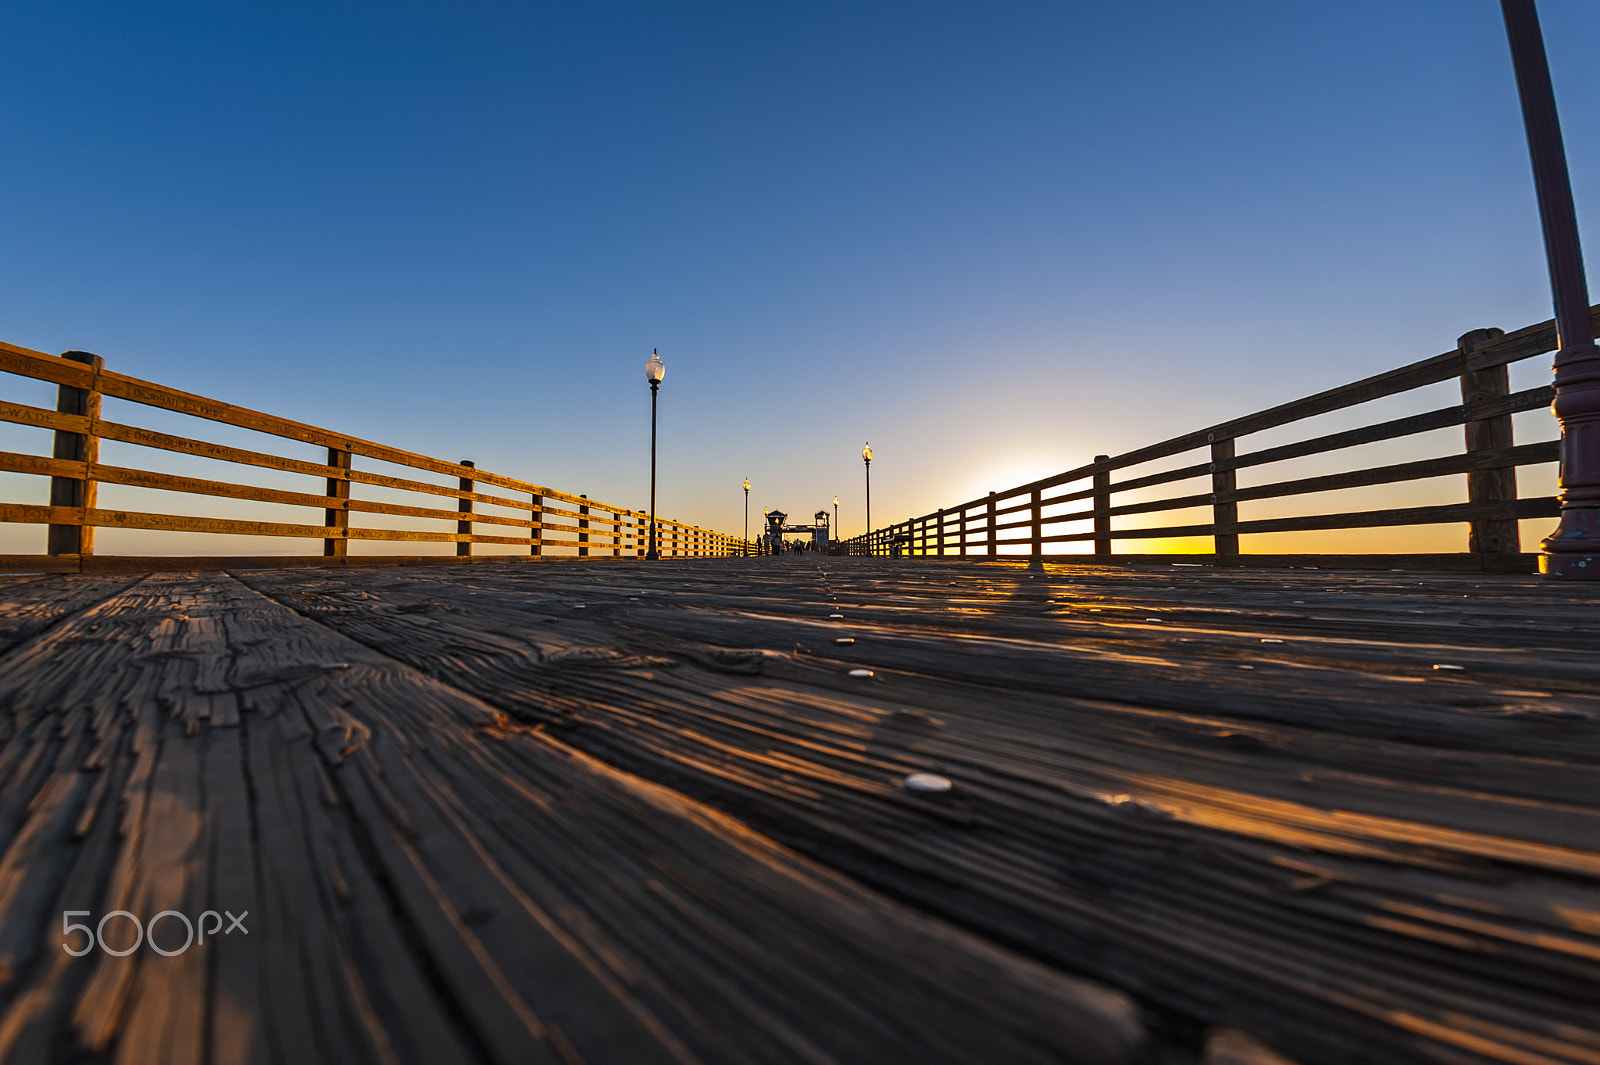 Nikon D700 sample photo. On the oceanside pier at sunset - february 23, 2017 photography